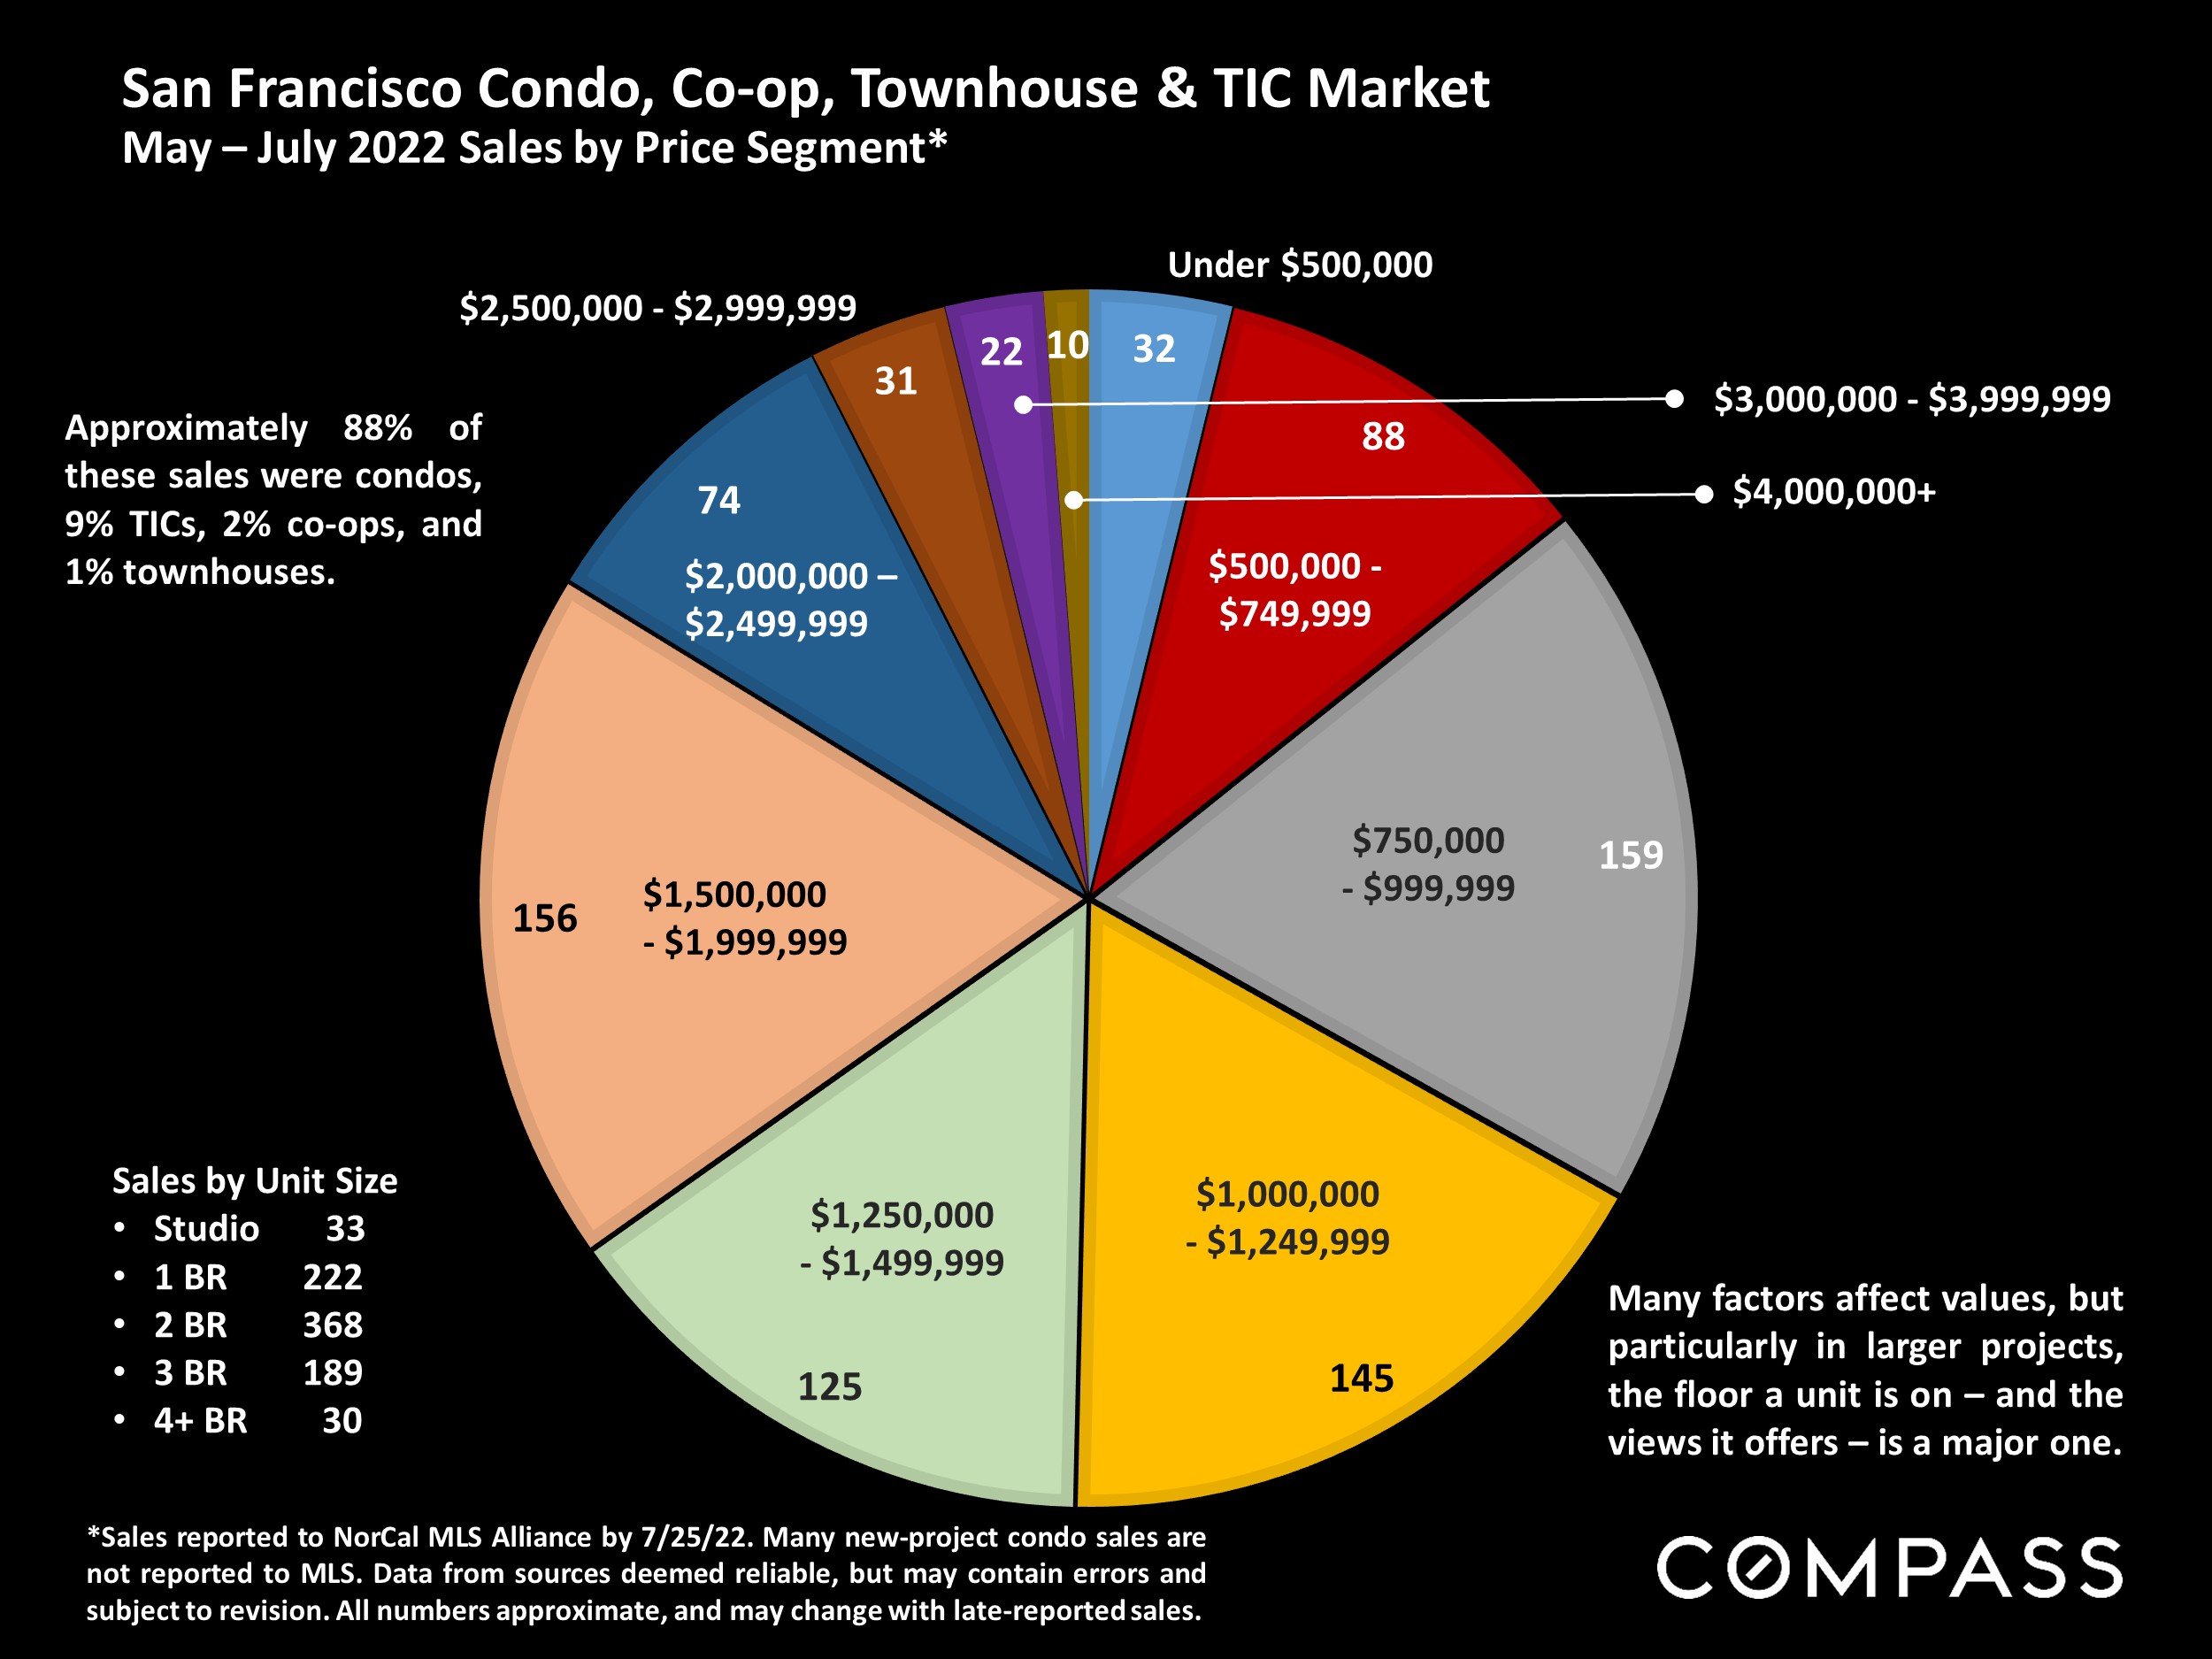 San Francisco Condo, Co-op, Townhouse & TIC Market May – July 2022 Sales by Price Segment*